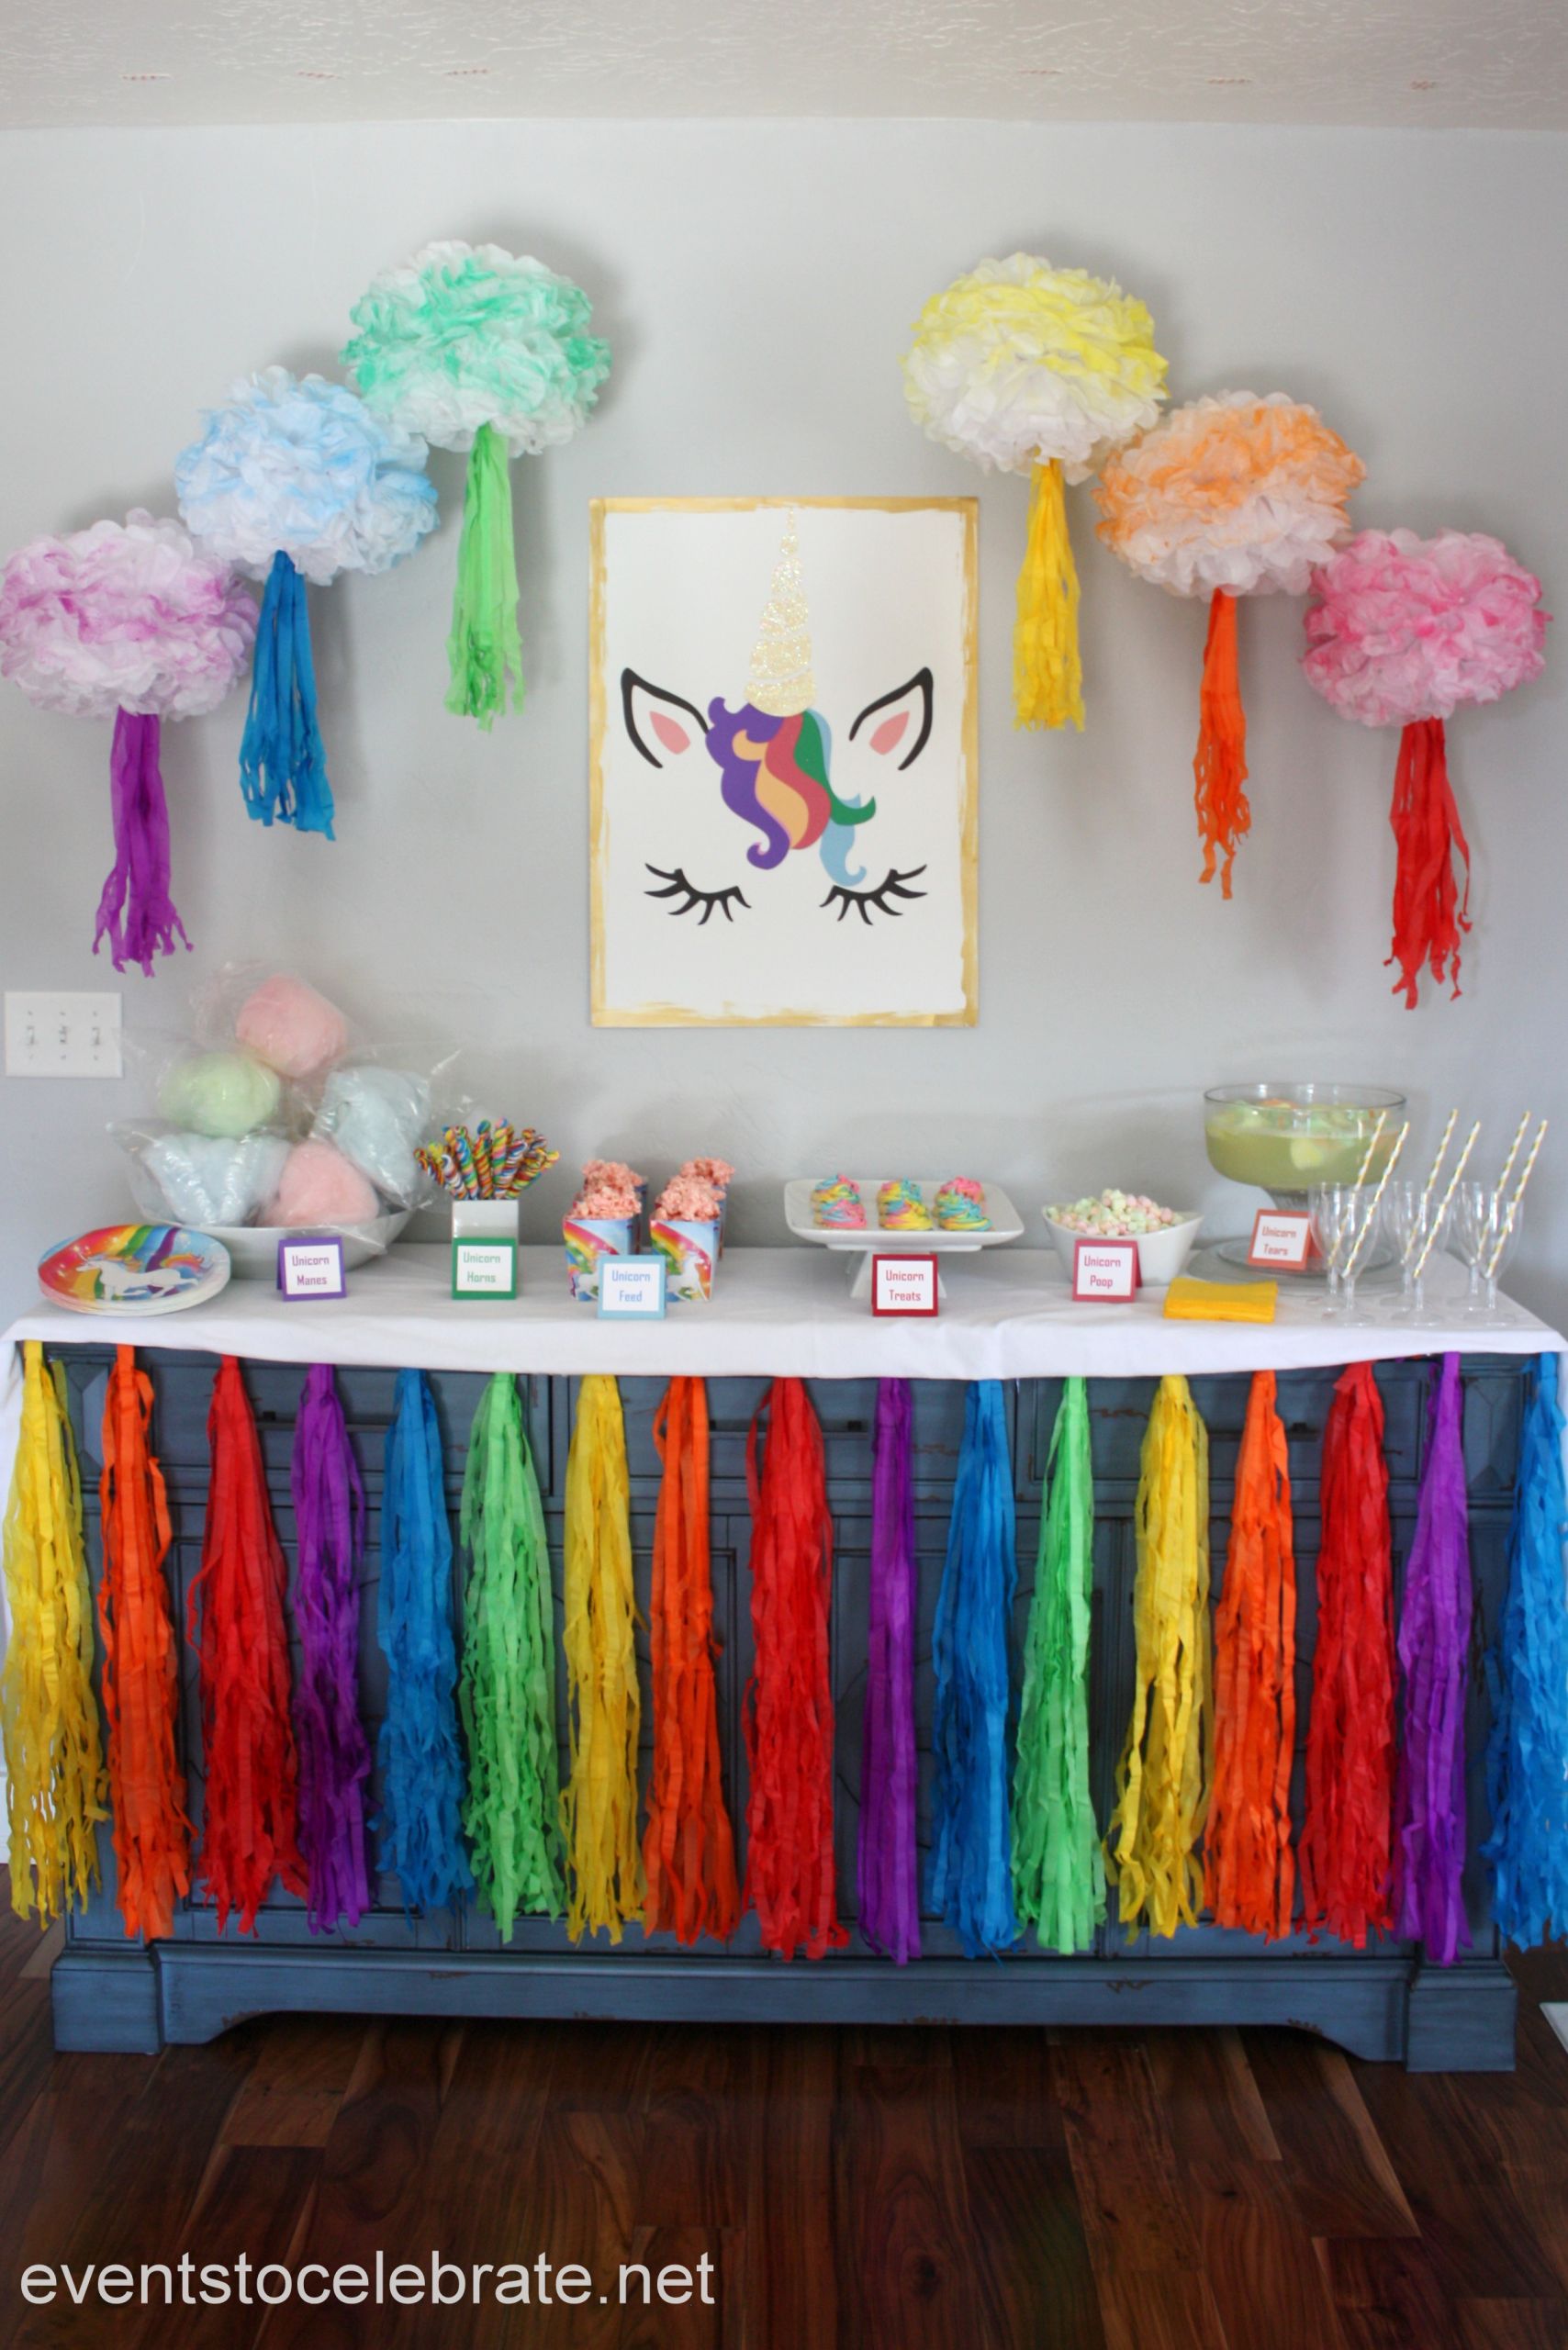 Unicorn Birthday Party Decorations Ideas
 Unicorn Party Decorations and Food